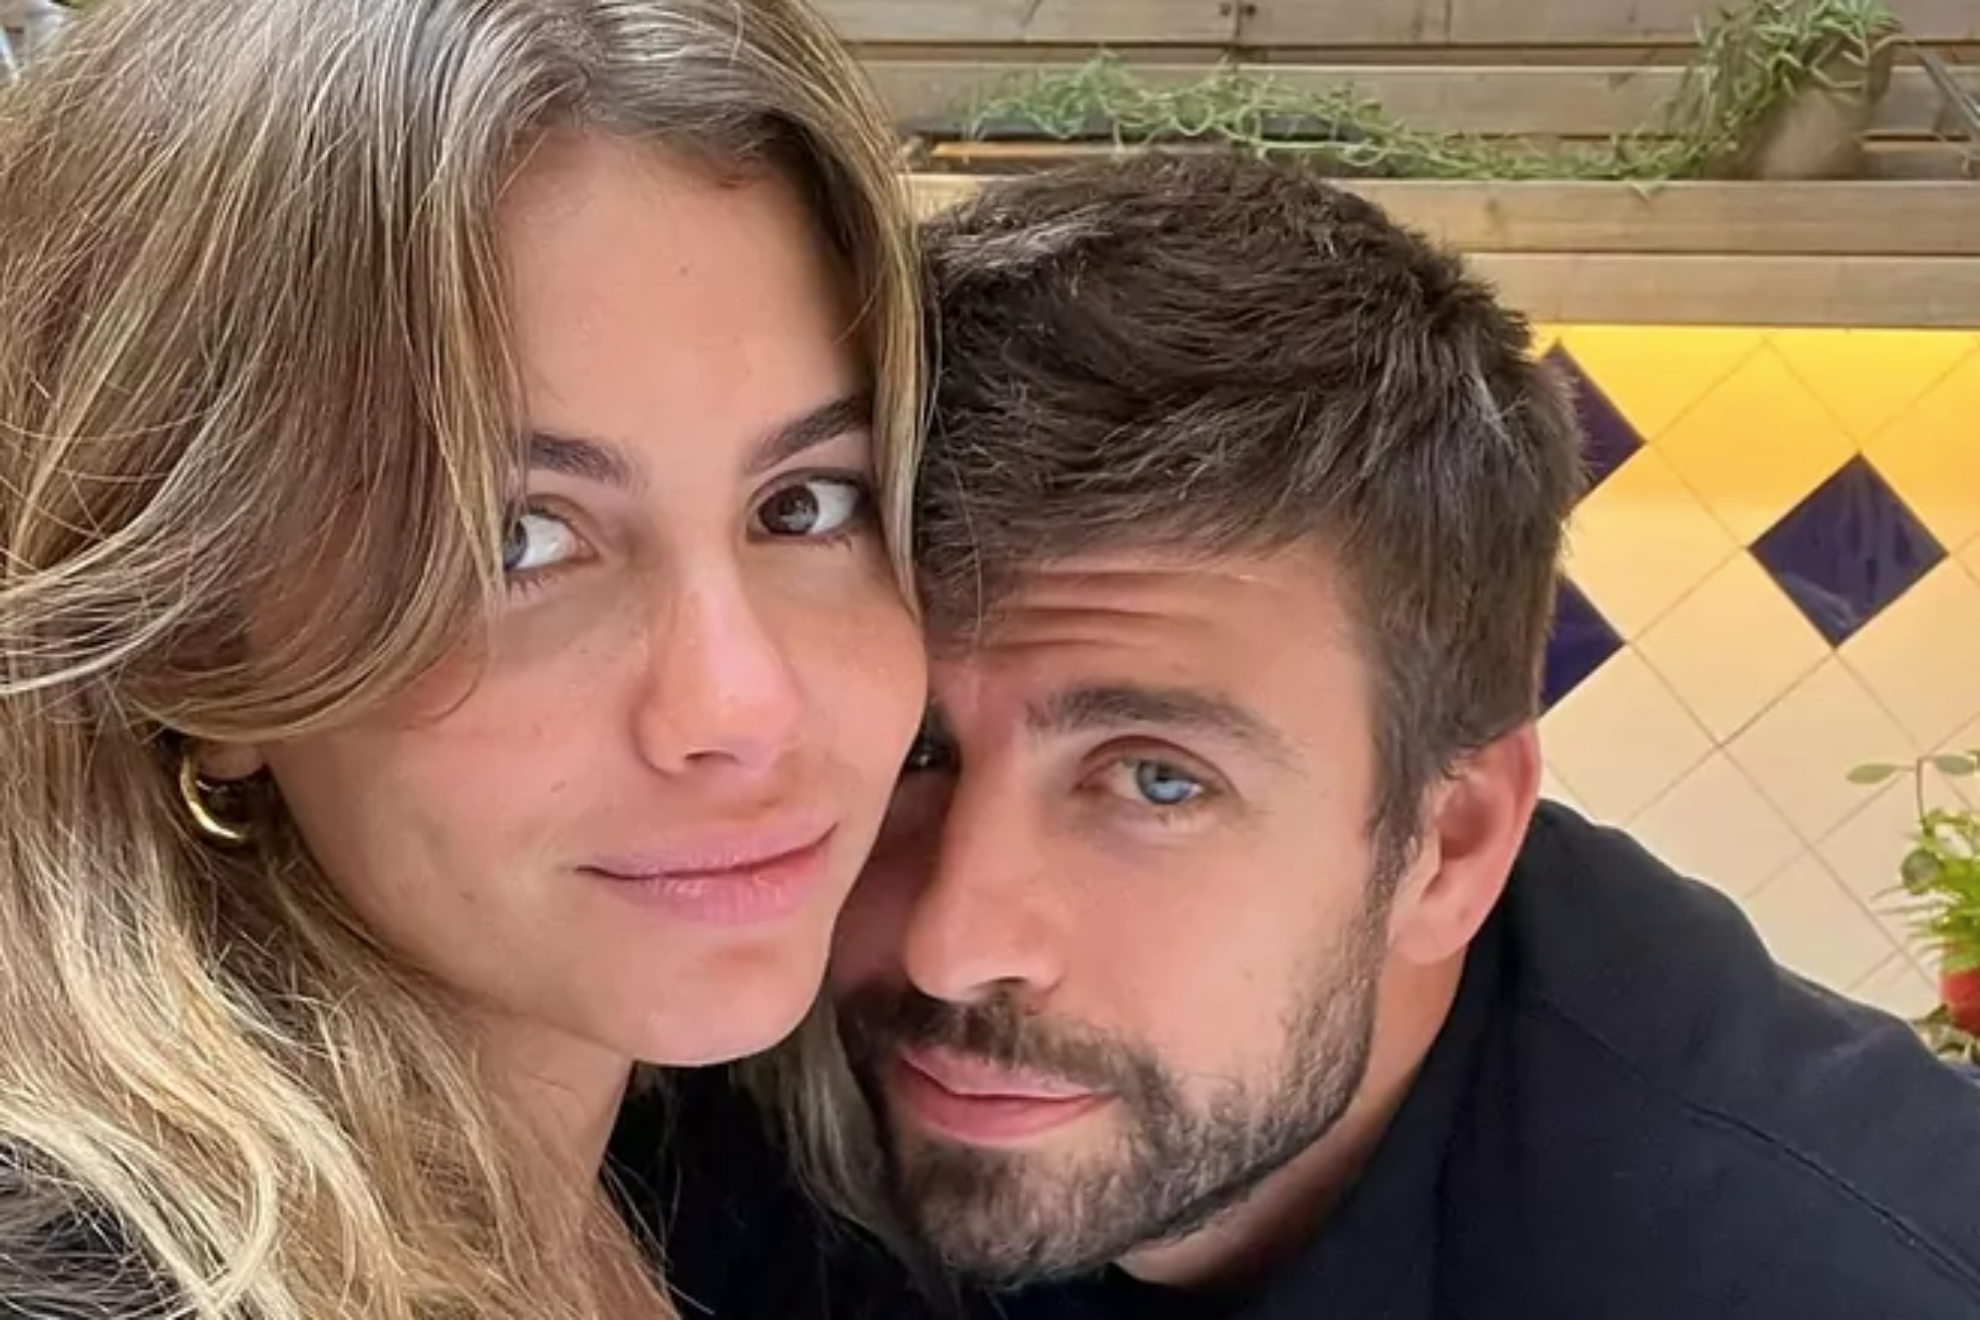 Gerard Pique keeps finding new problems: Clara Chia's tantrums, one more?